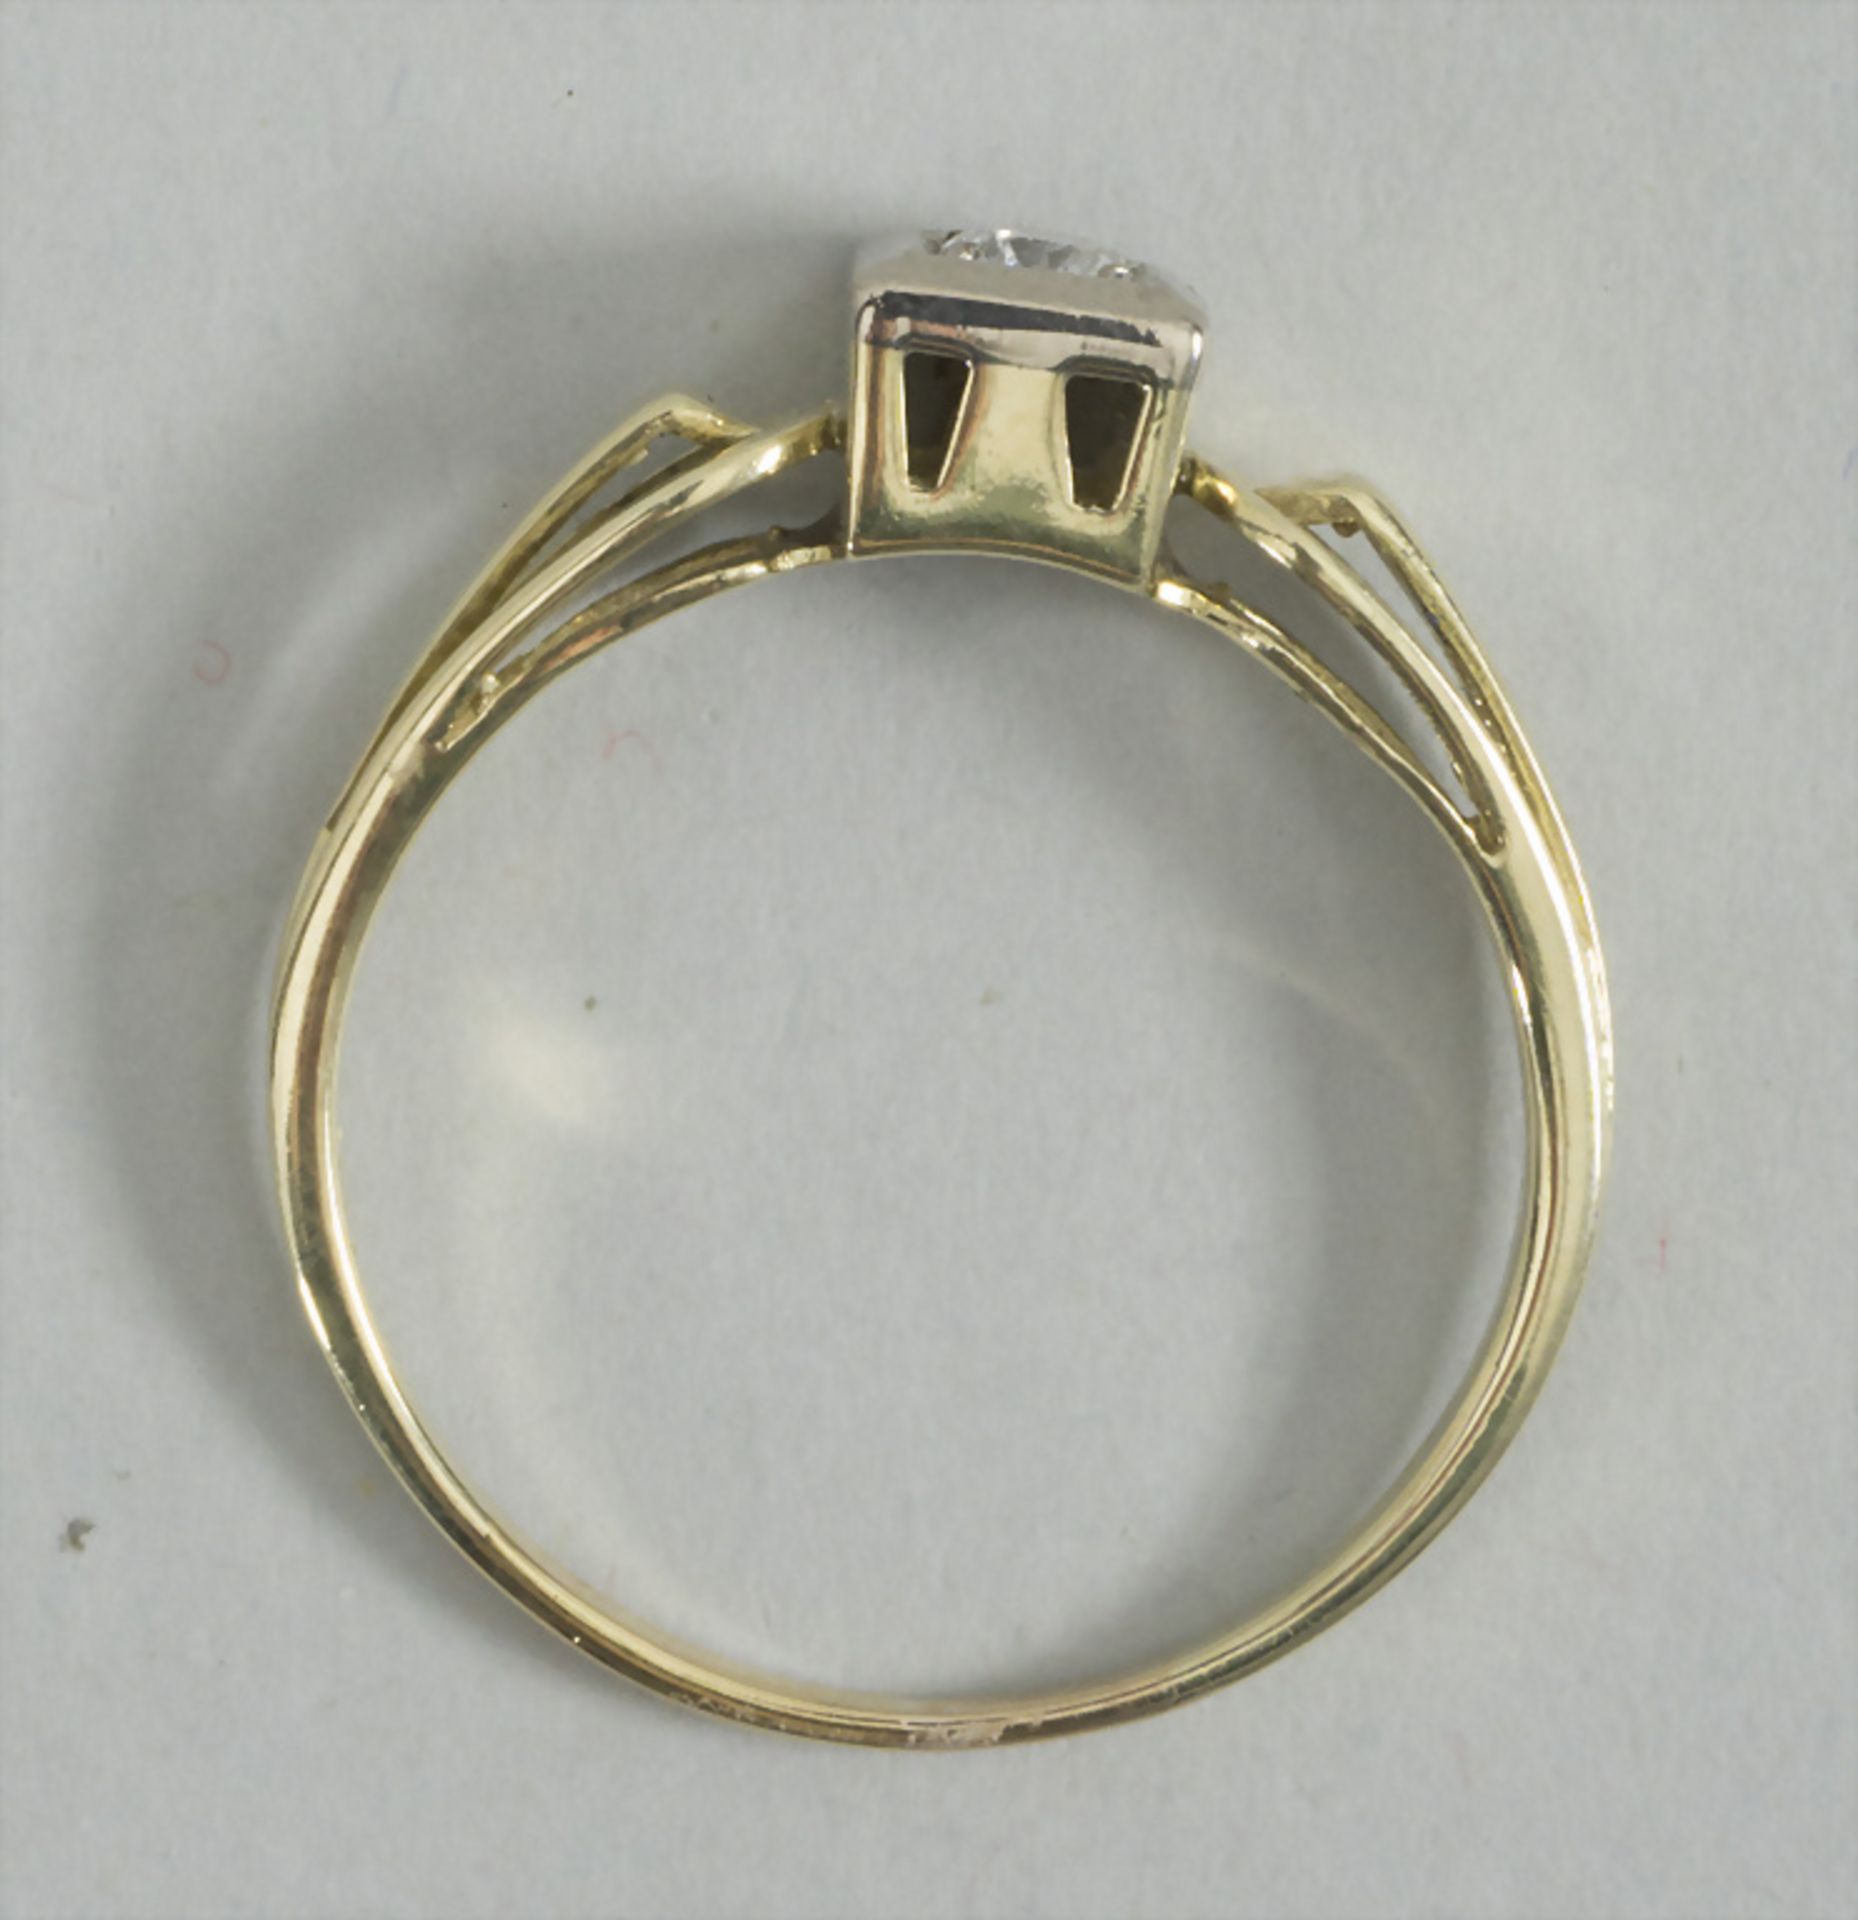 Brillant Solitärring / A 14k gold ring with a brilliant solitaire - Image 3 of 5